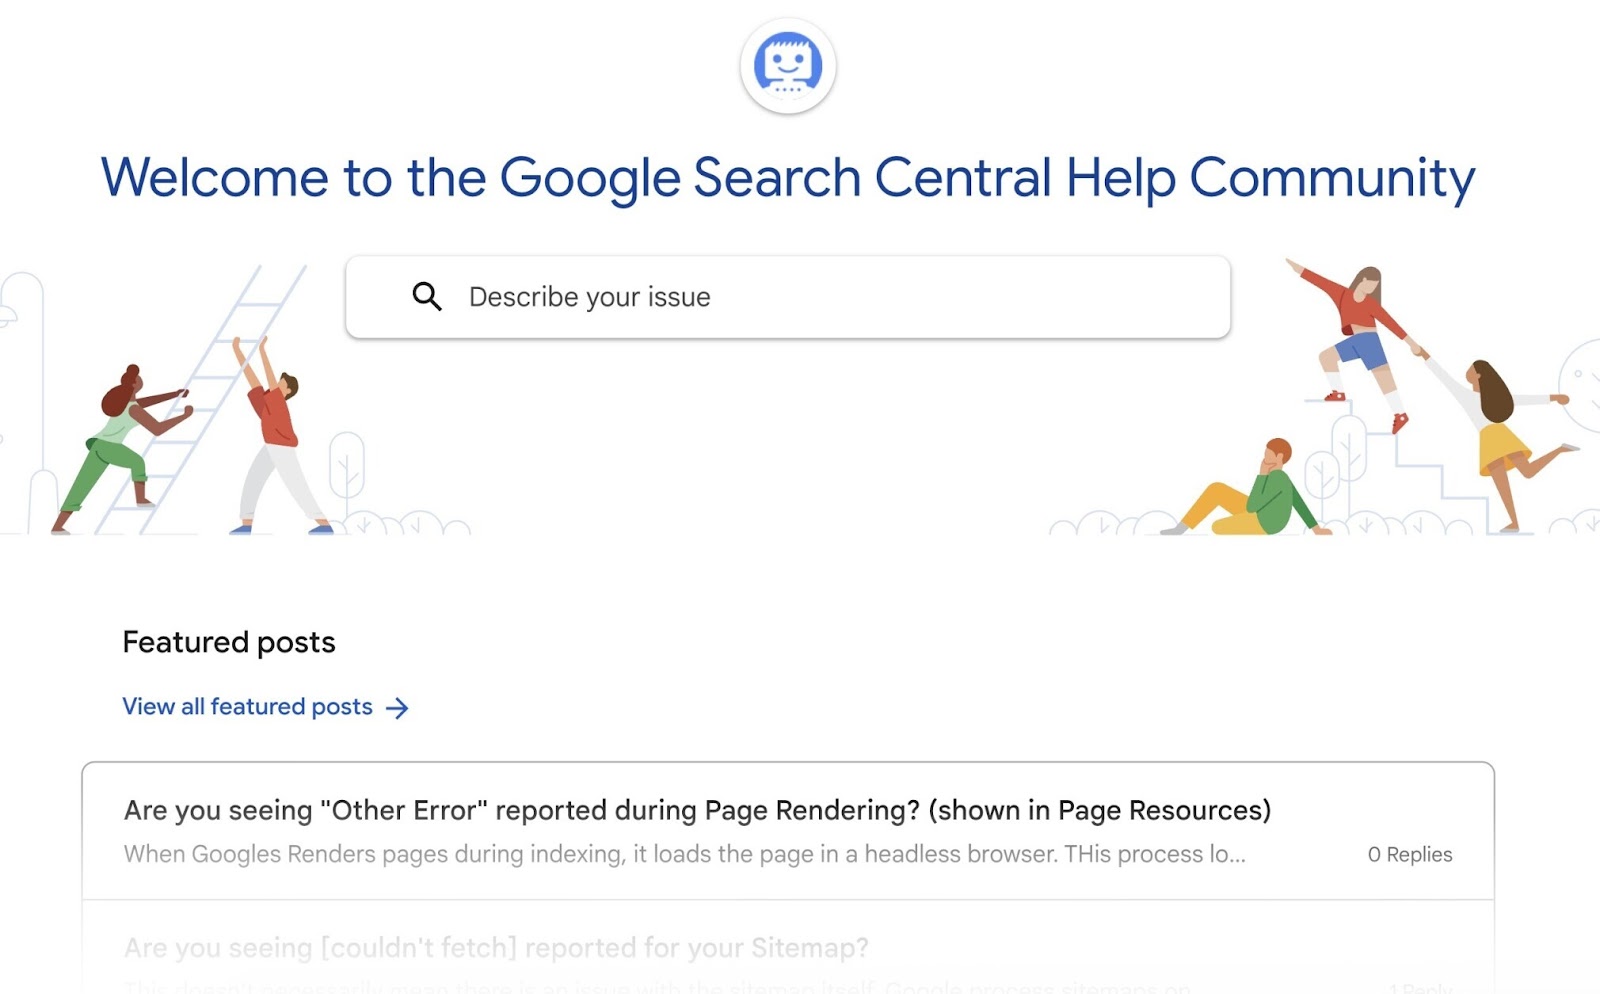 Google’s Search Central Help Community